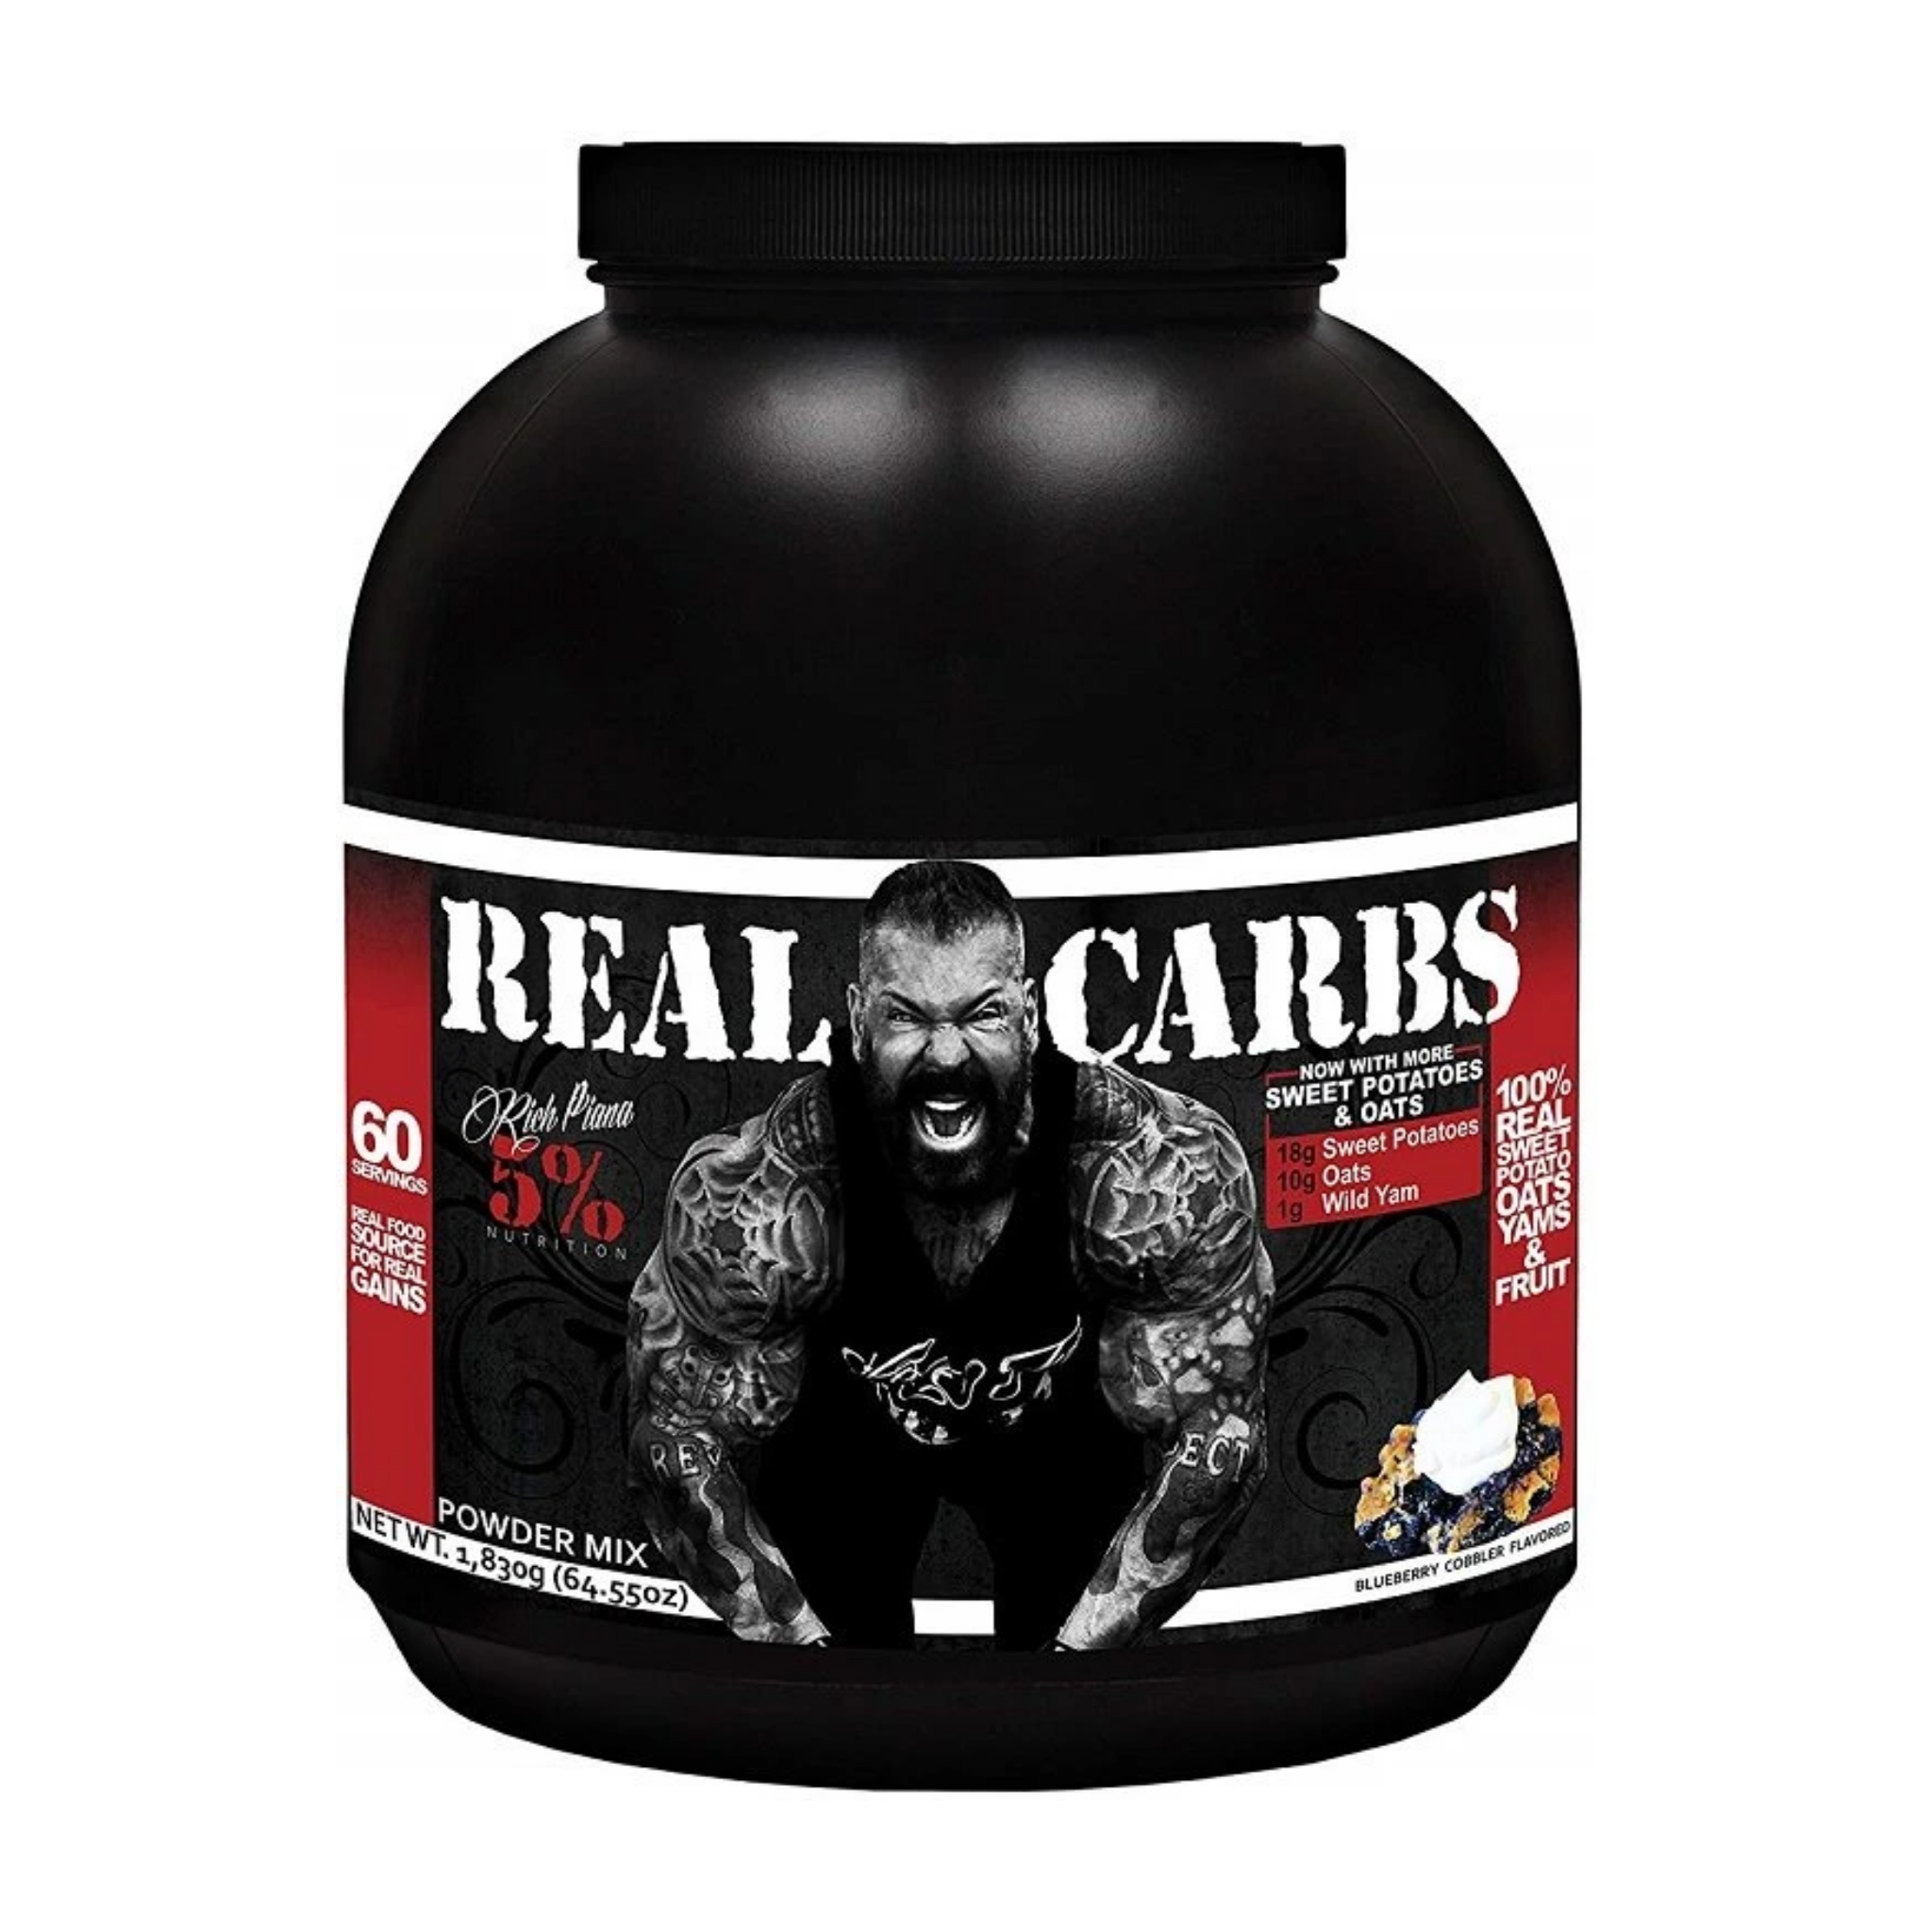 5% Nutrition Real Carbs - Legendary Series